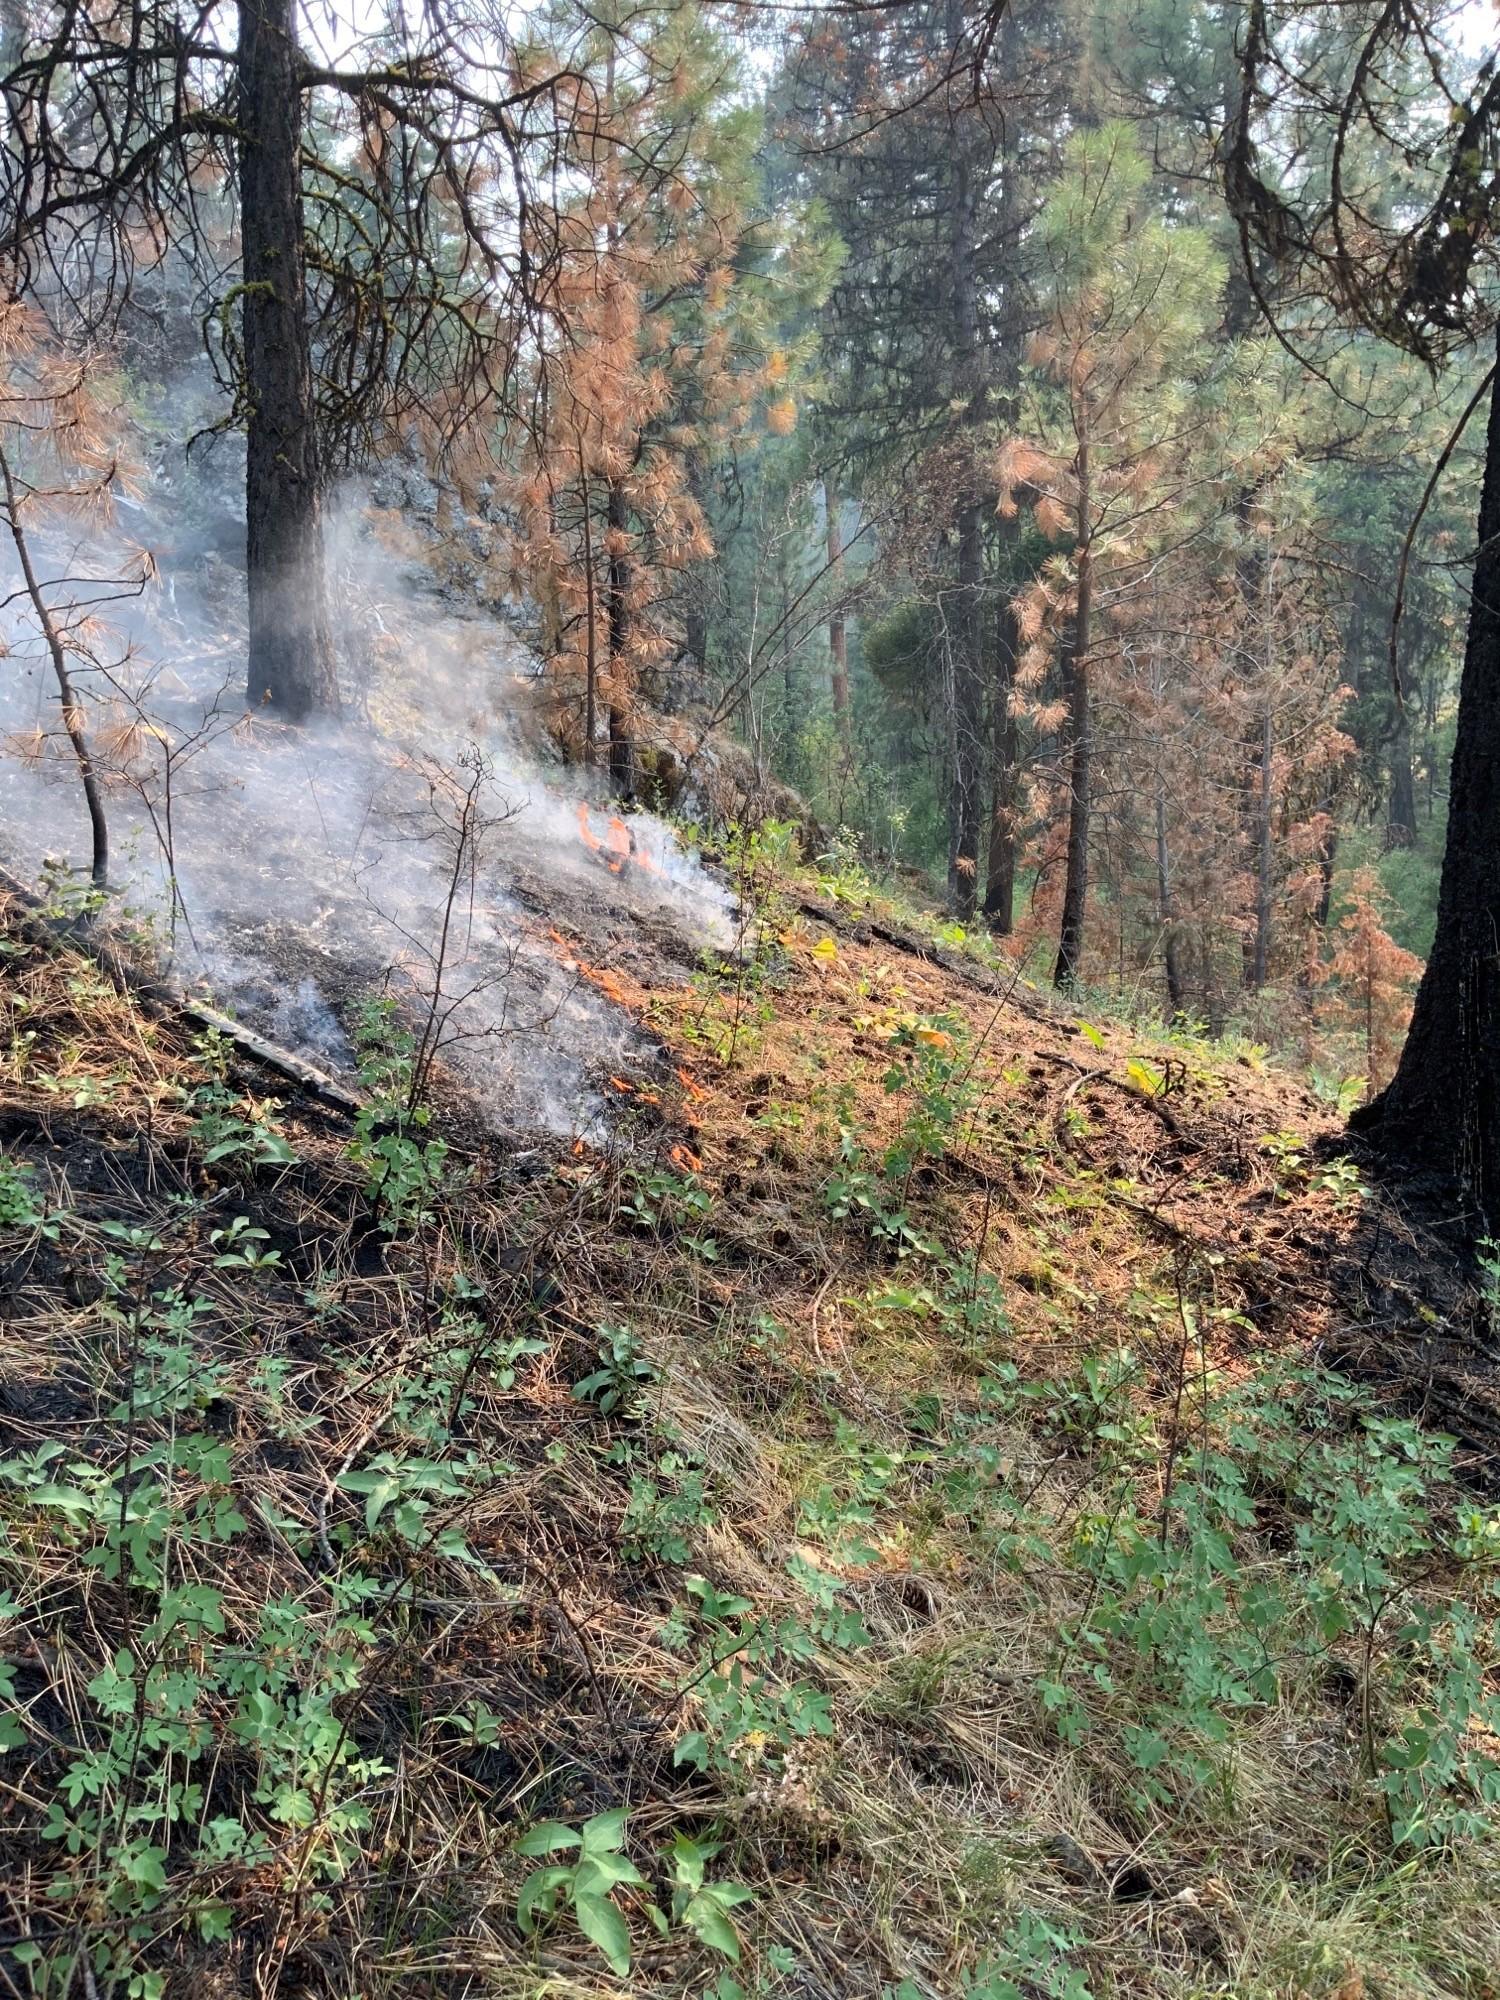 Image from Murderers Creek 6 prescribed fire area showing low burning flame.